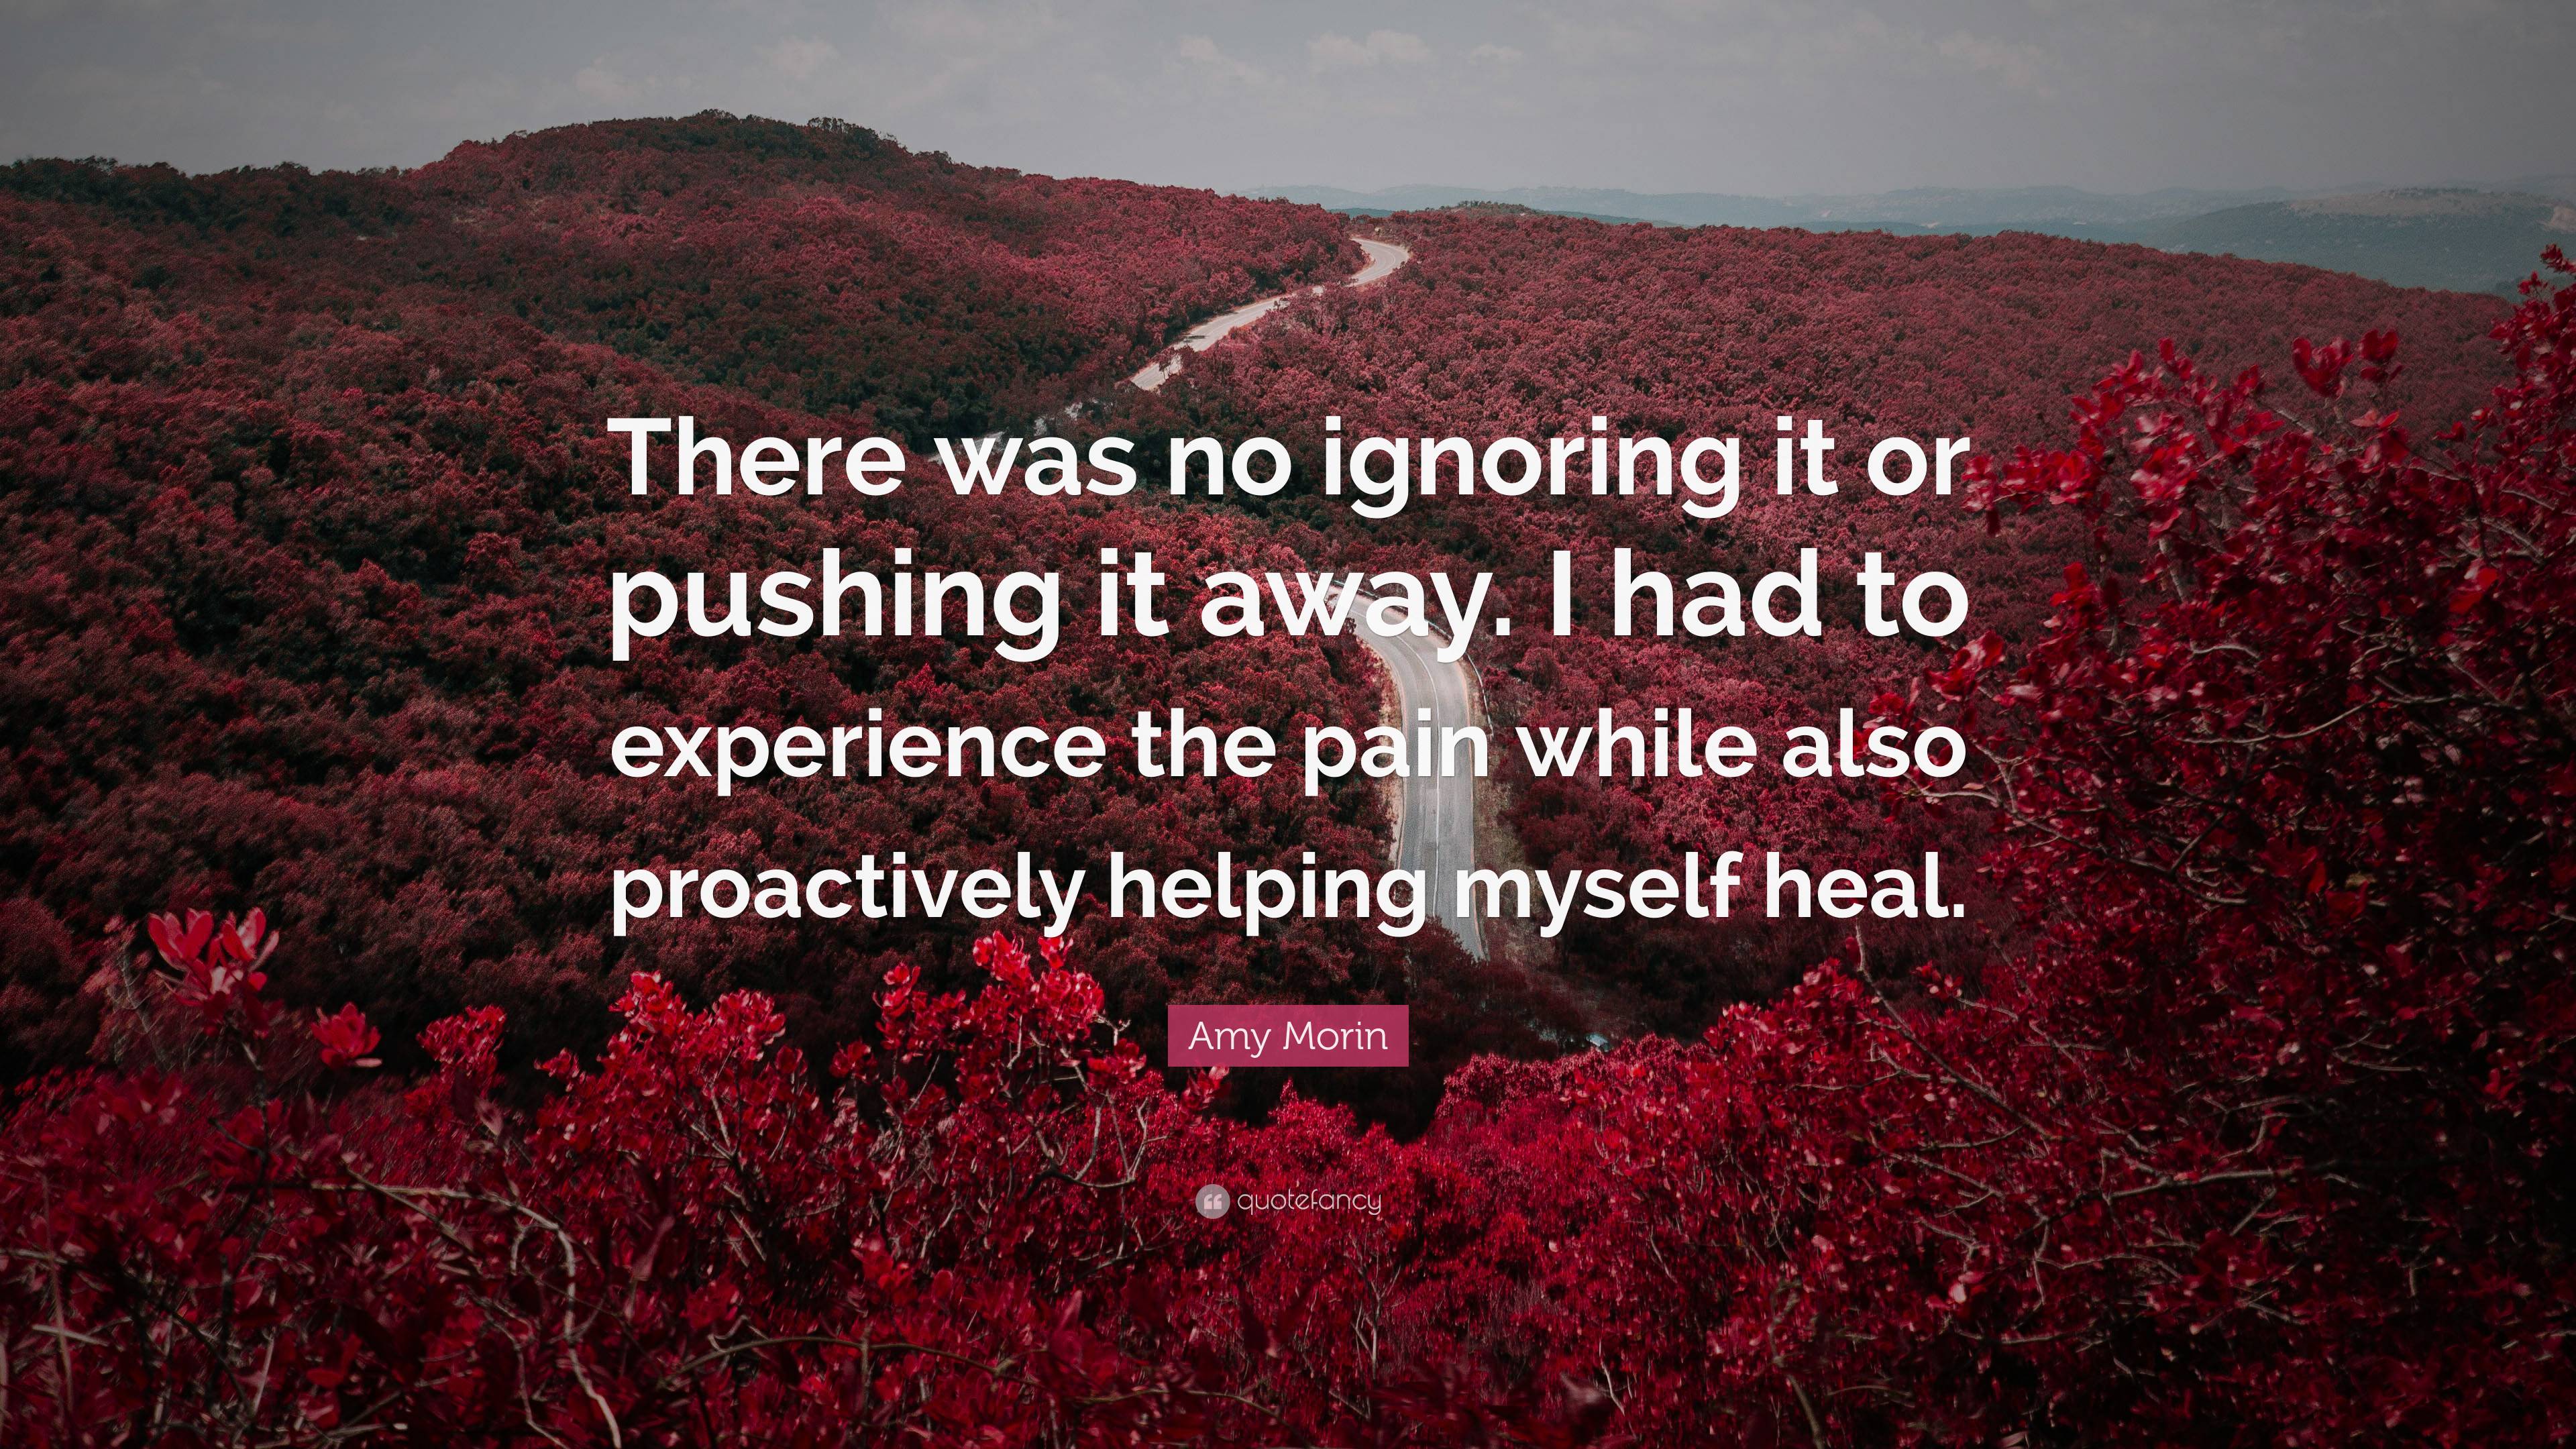 I had to experience the pain while also proactively helping myself heal. 